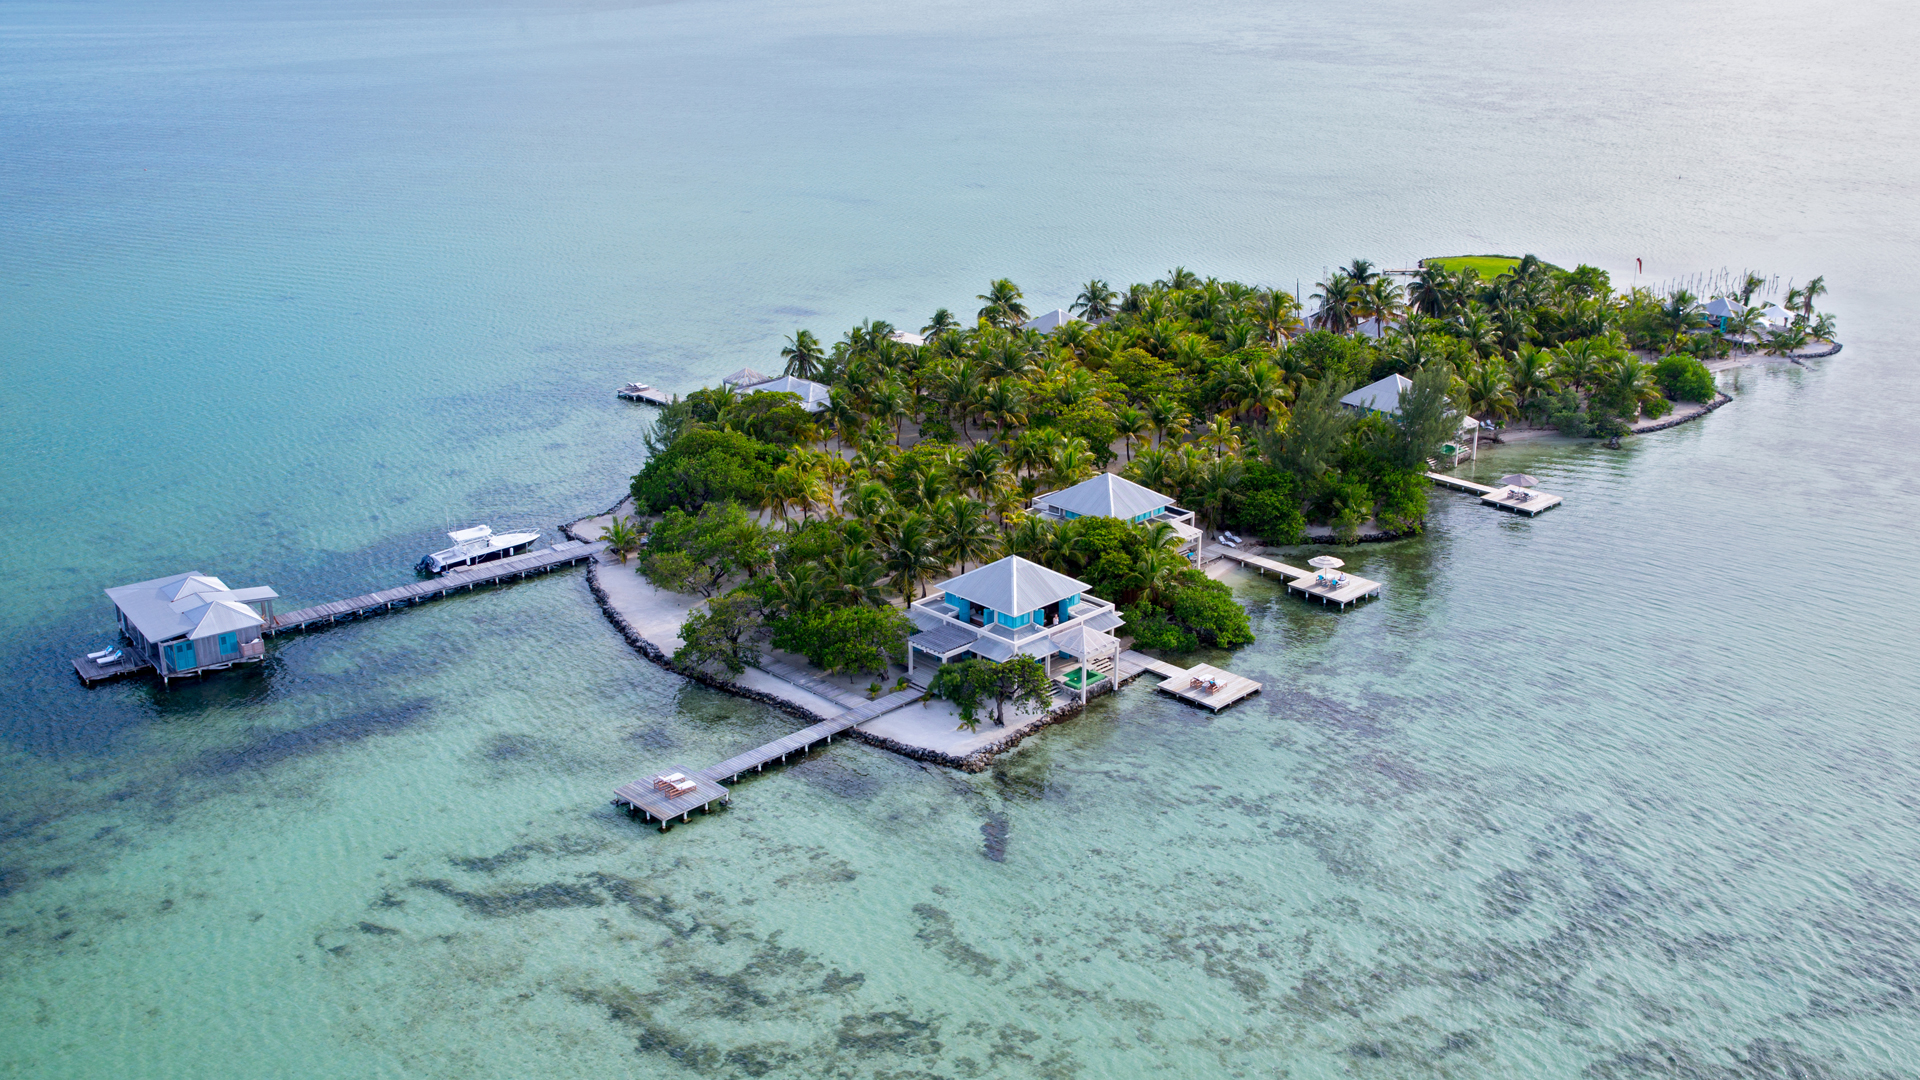 Cottages at the private island in Cayo Espanto, Belize